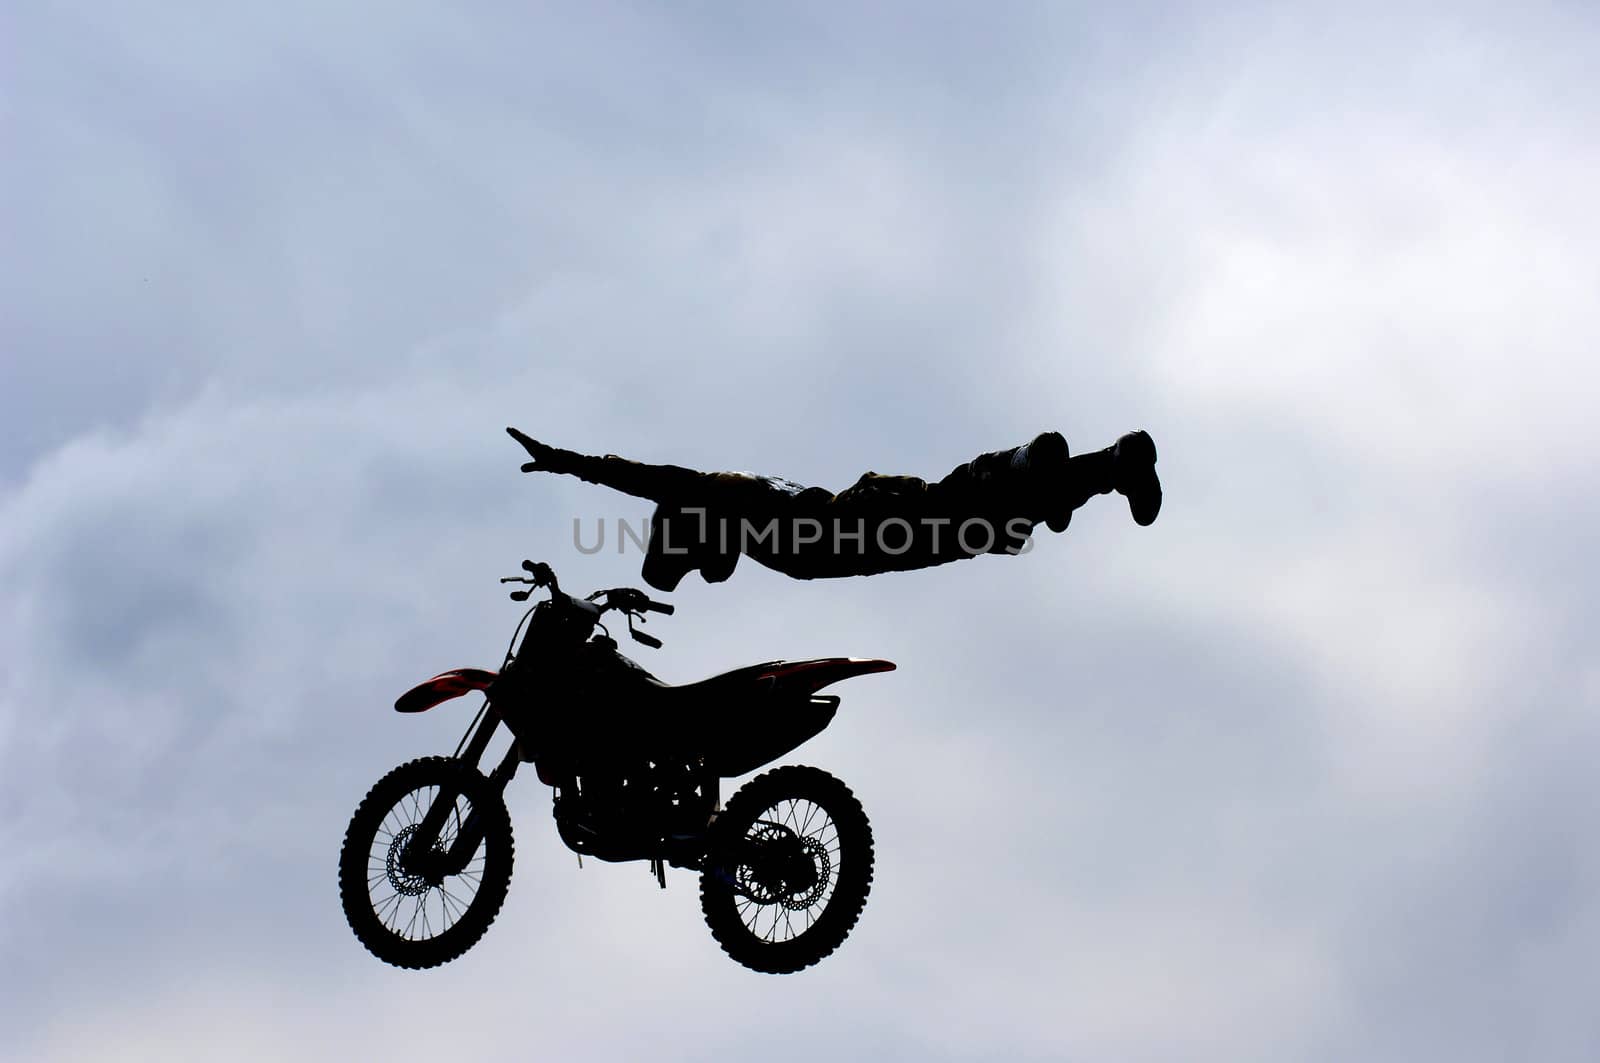 A freestyle motocross rider performs a trick (superman) during a competition.